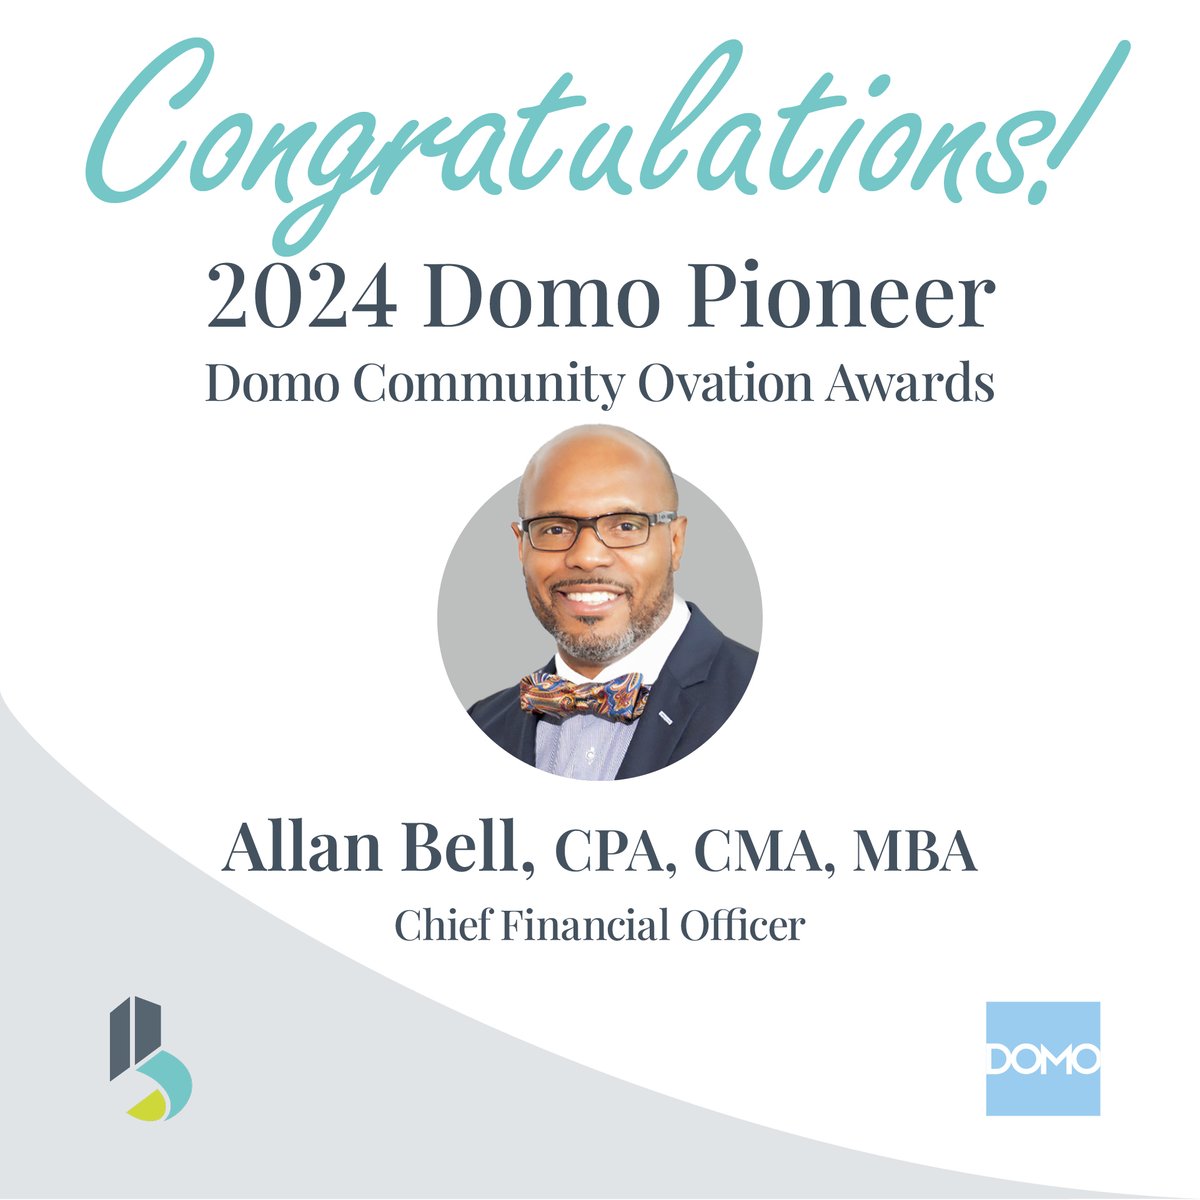 Congratulations to our very own Chief Financial Officer, Allan Bell, for being recognized as the Domo Pioneer at the 2024 Domo Community Ovation Awards. Congrats, Allan, and thank you @domotalk! #Domo #Awards #DP24 #BradleyCompany